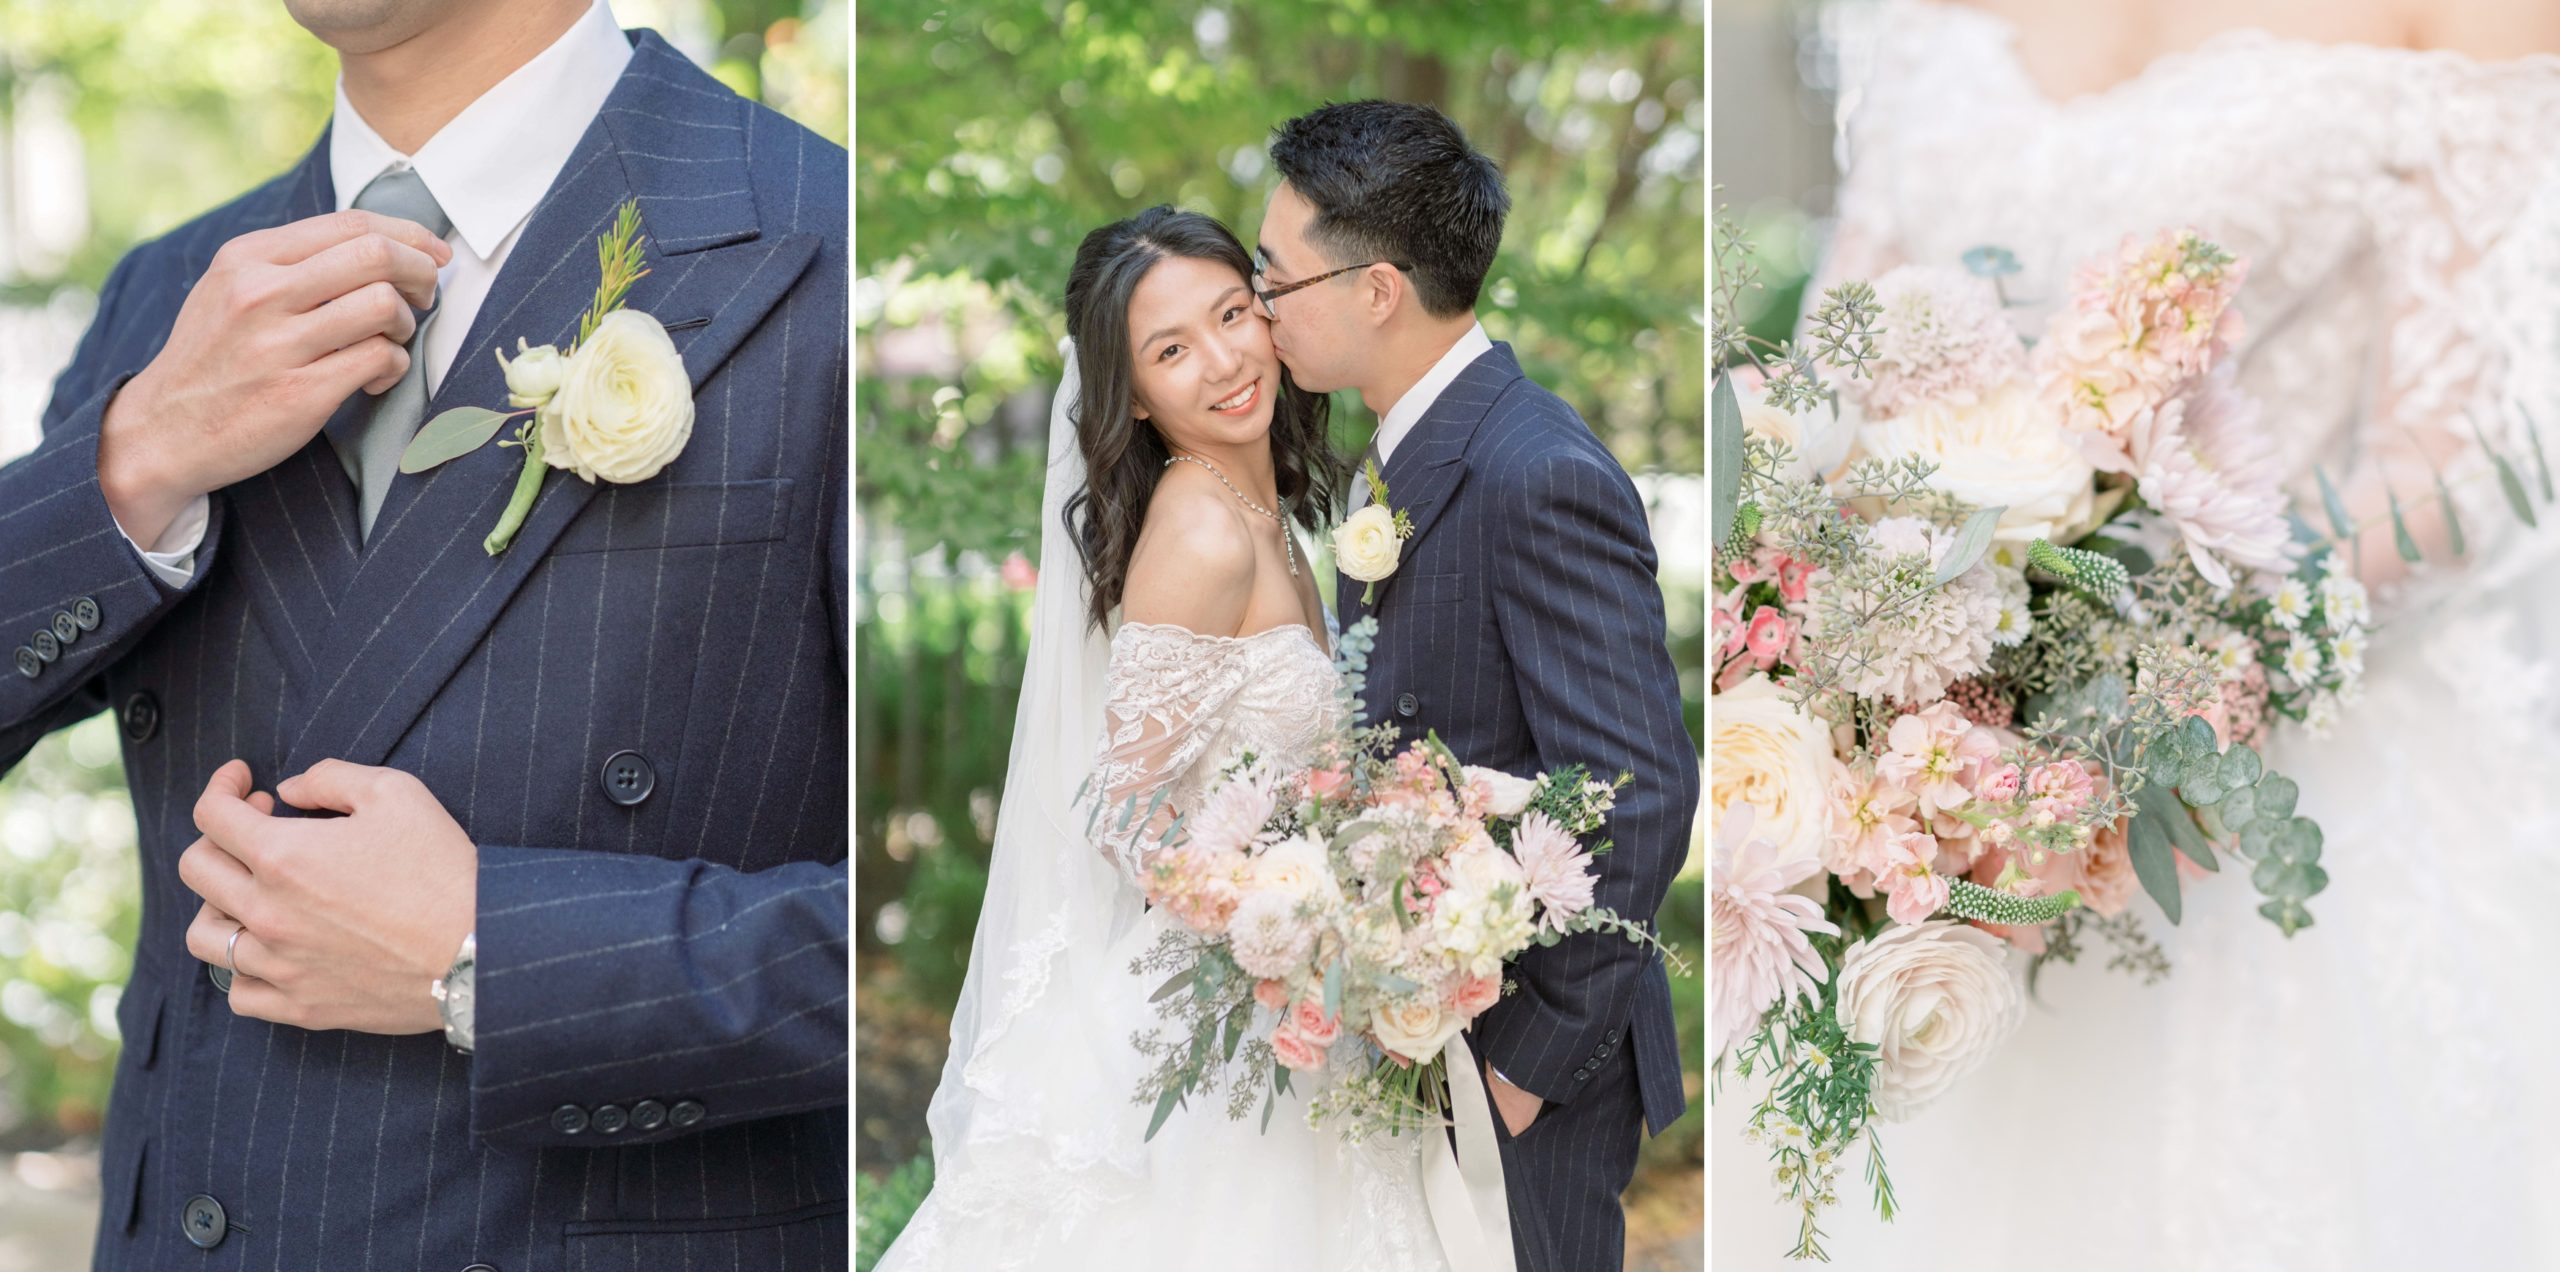 A elegant wedding on the Astor Terrace at the St. Regis Hotel in downtown Washington, DC.